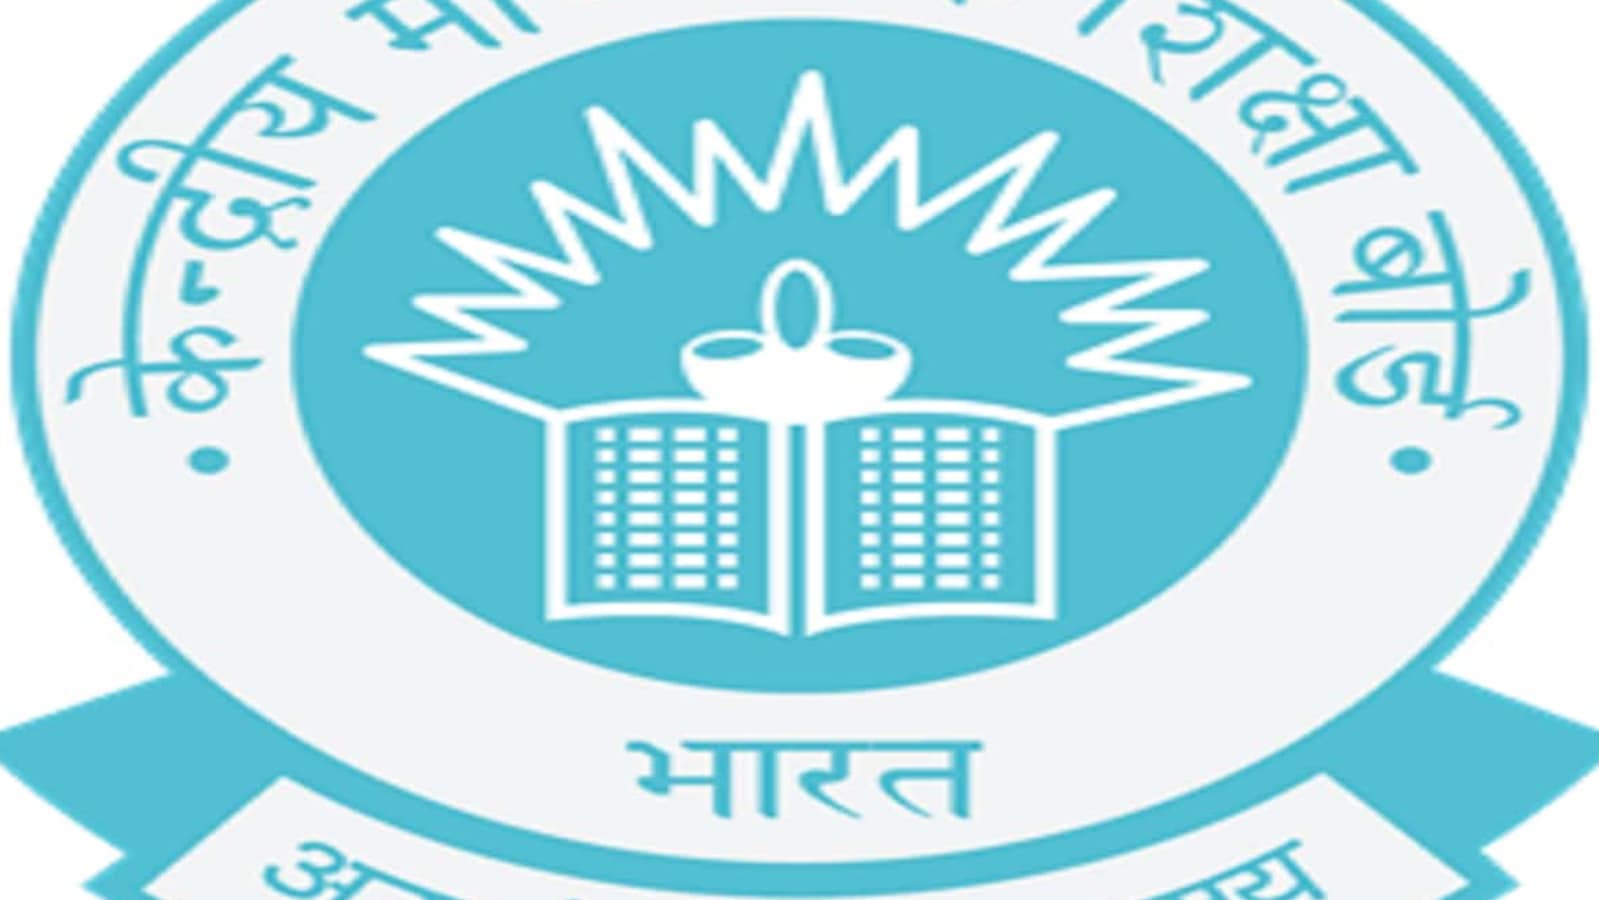 CBSE 10th Result 2021 Live Updates: Check result at cbseresults.nic.in soon